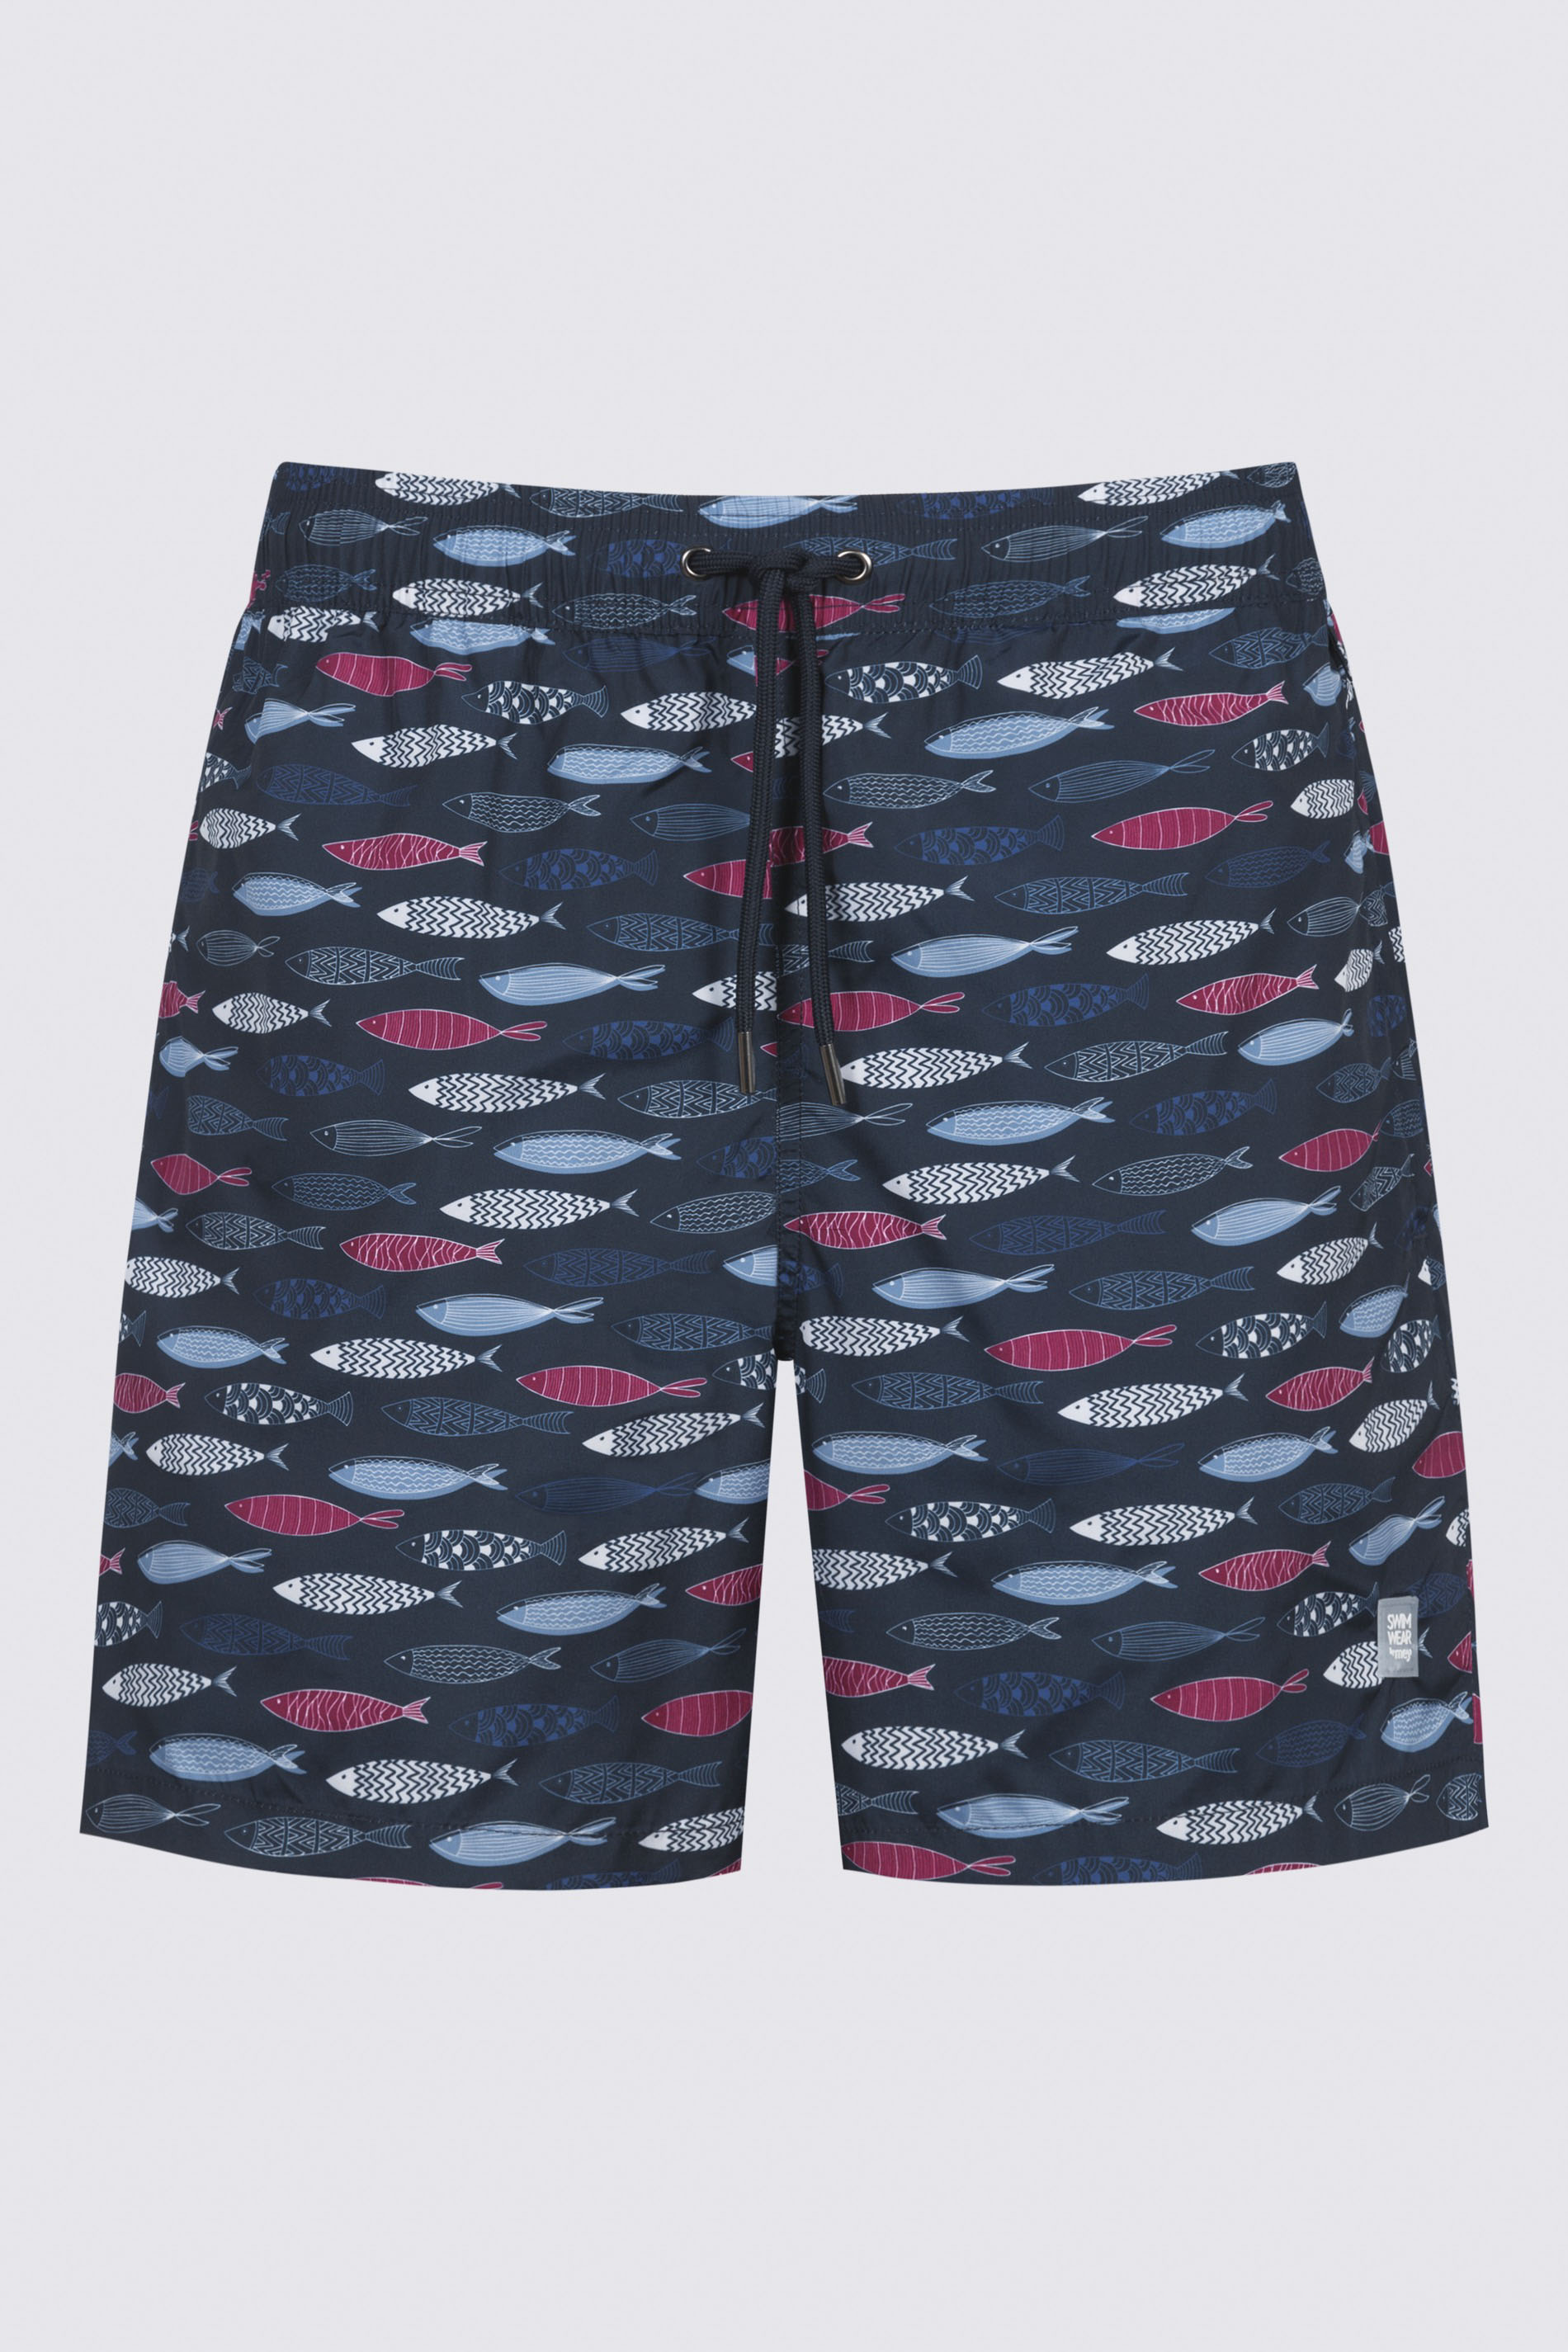 Zwemshorts Serie Fish Uitknippen | mey®